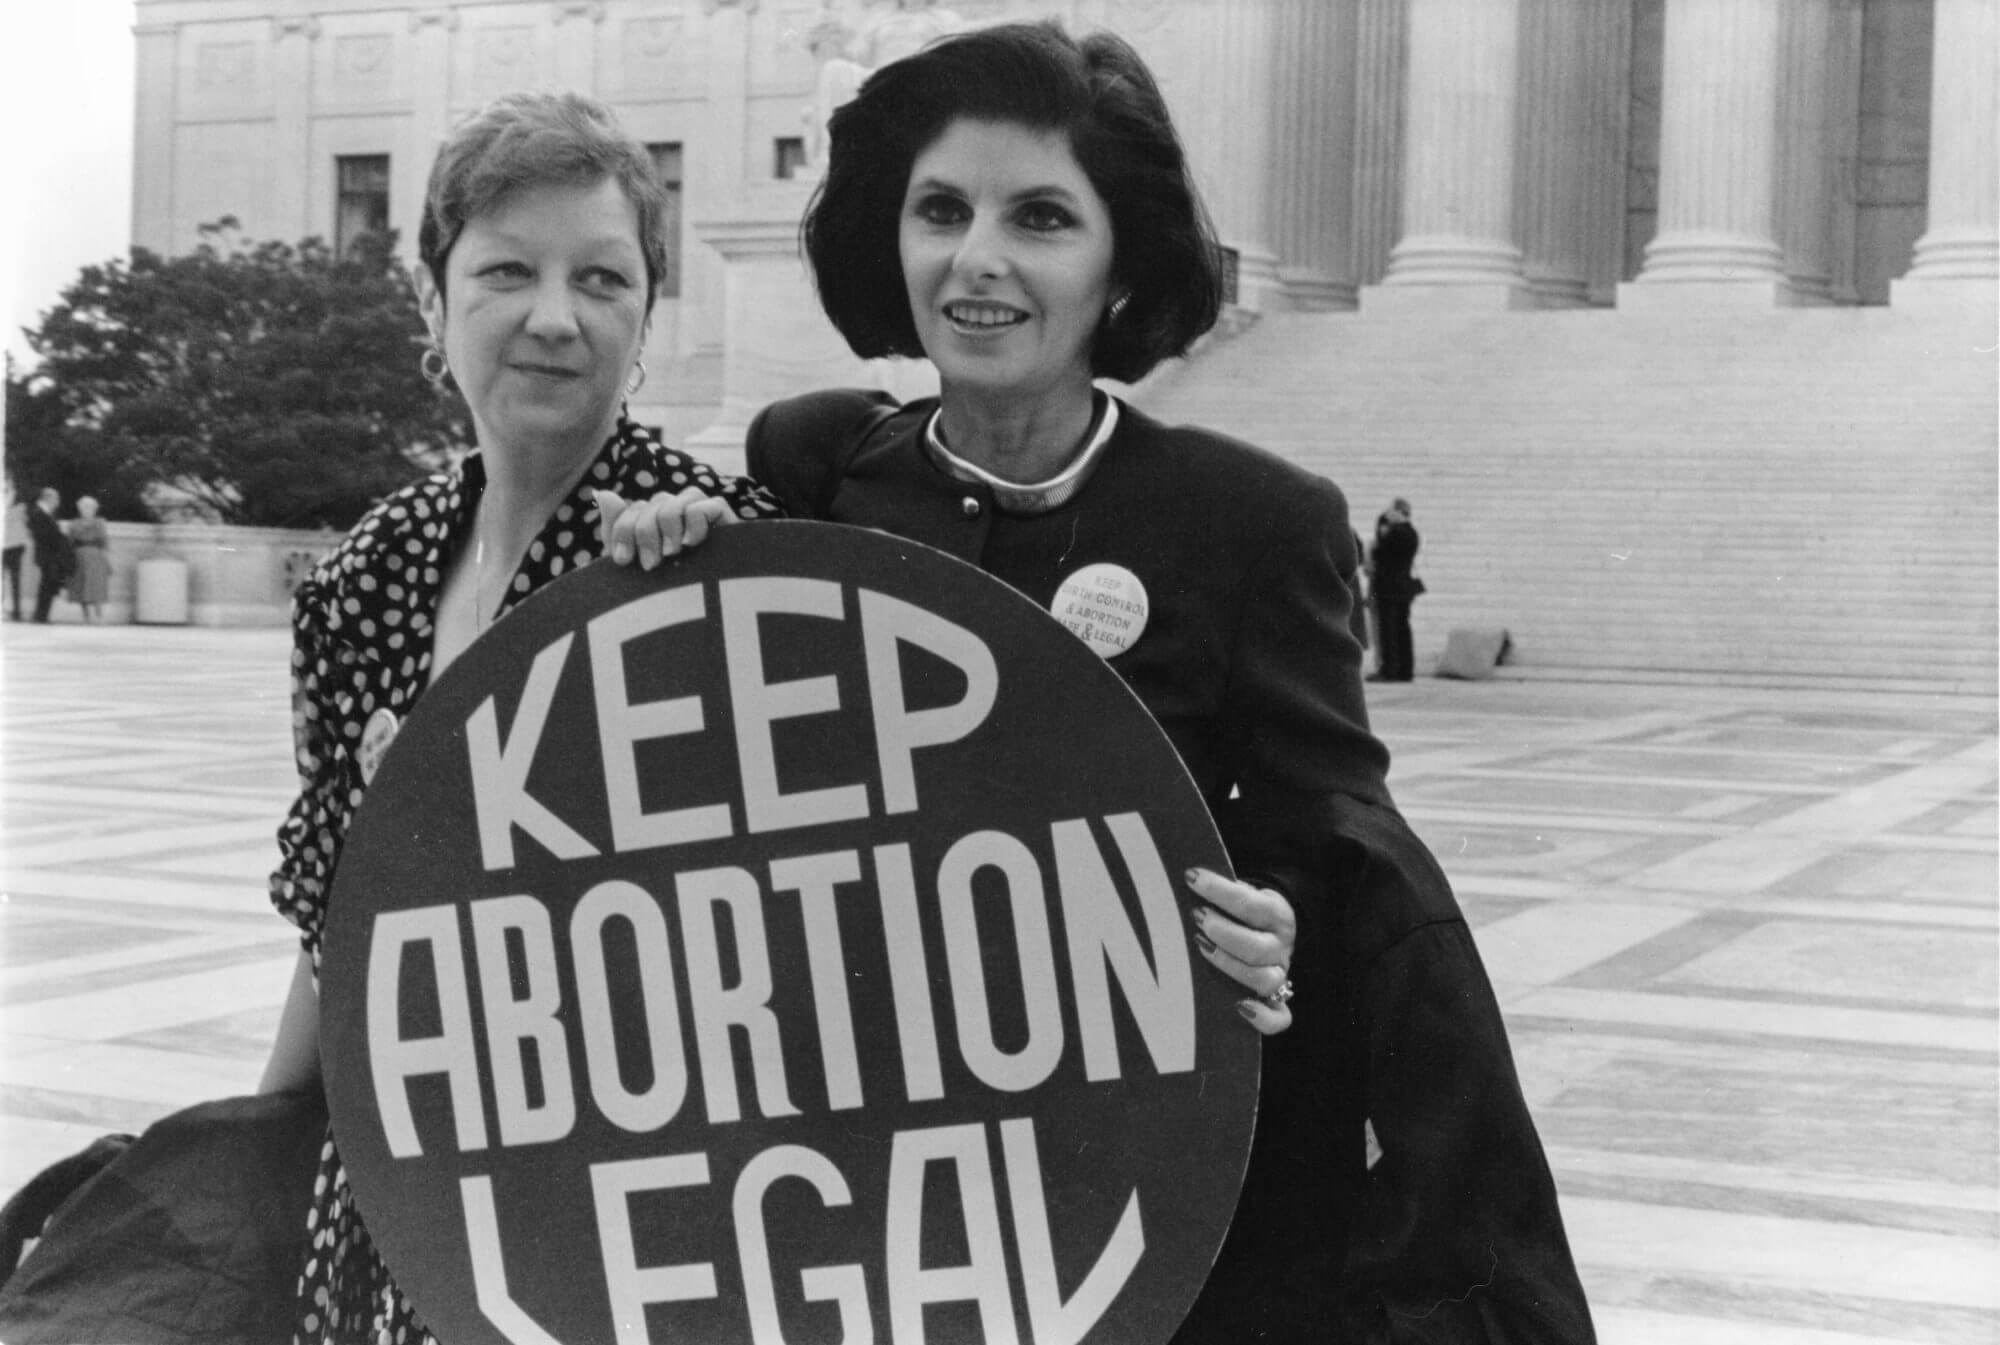 Two women standing in front of the supreme court building holding a sign that says "keep abortion legal."